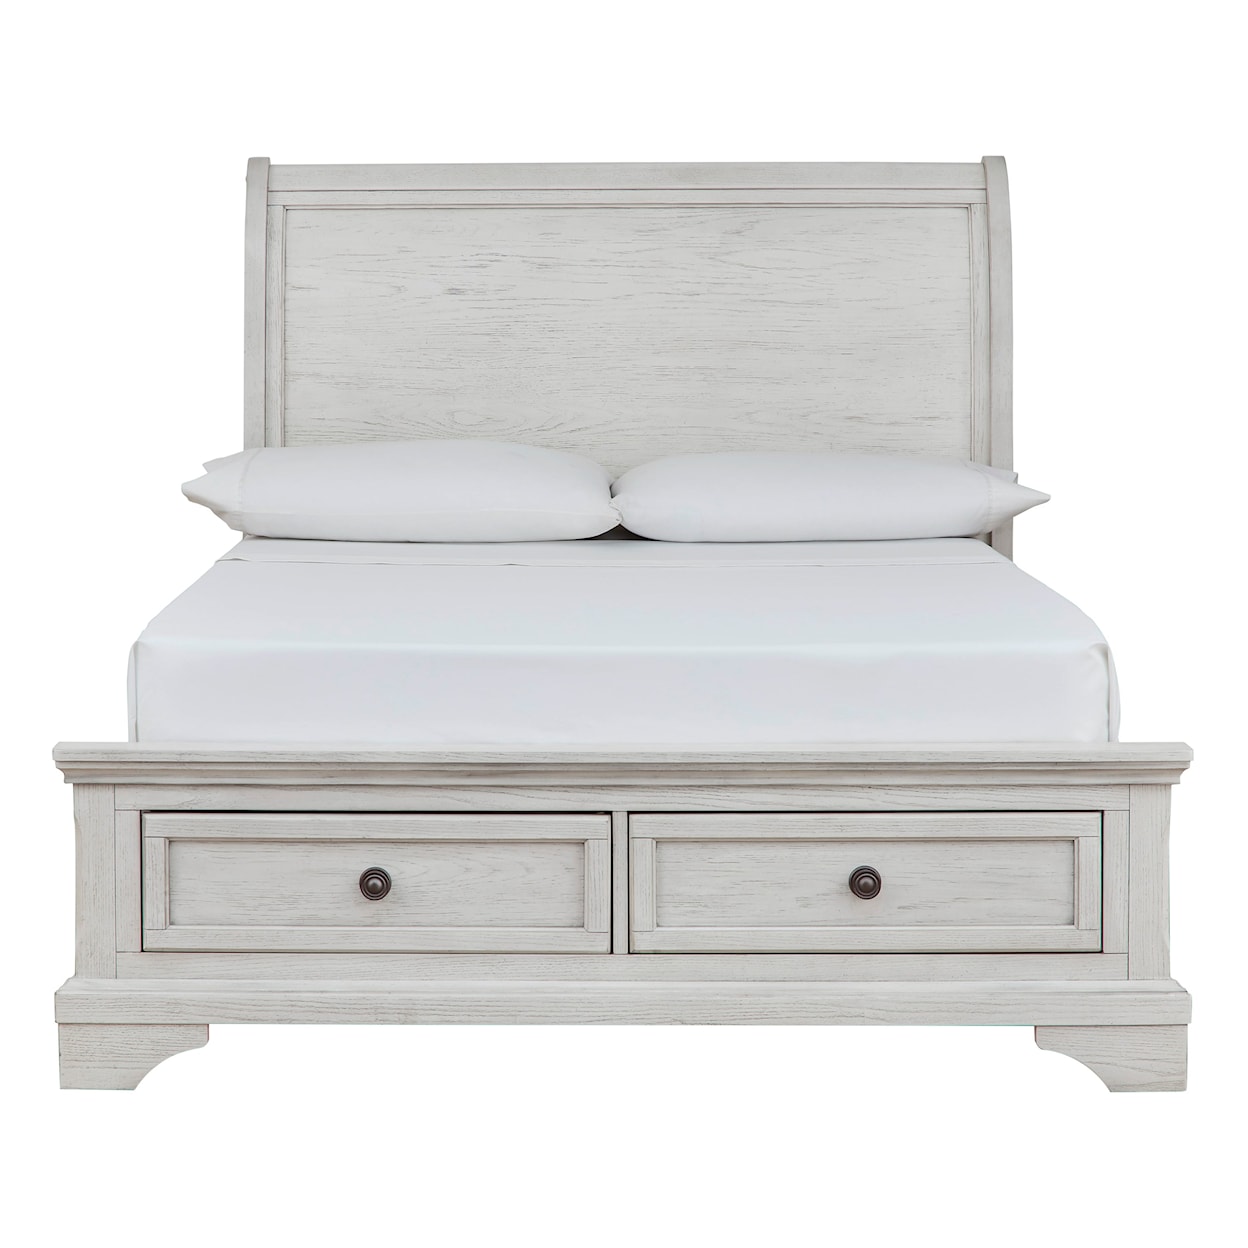 Ashley Signature Design Robbinsdale Full Sleigh Bed with Storage